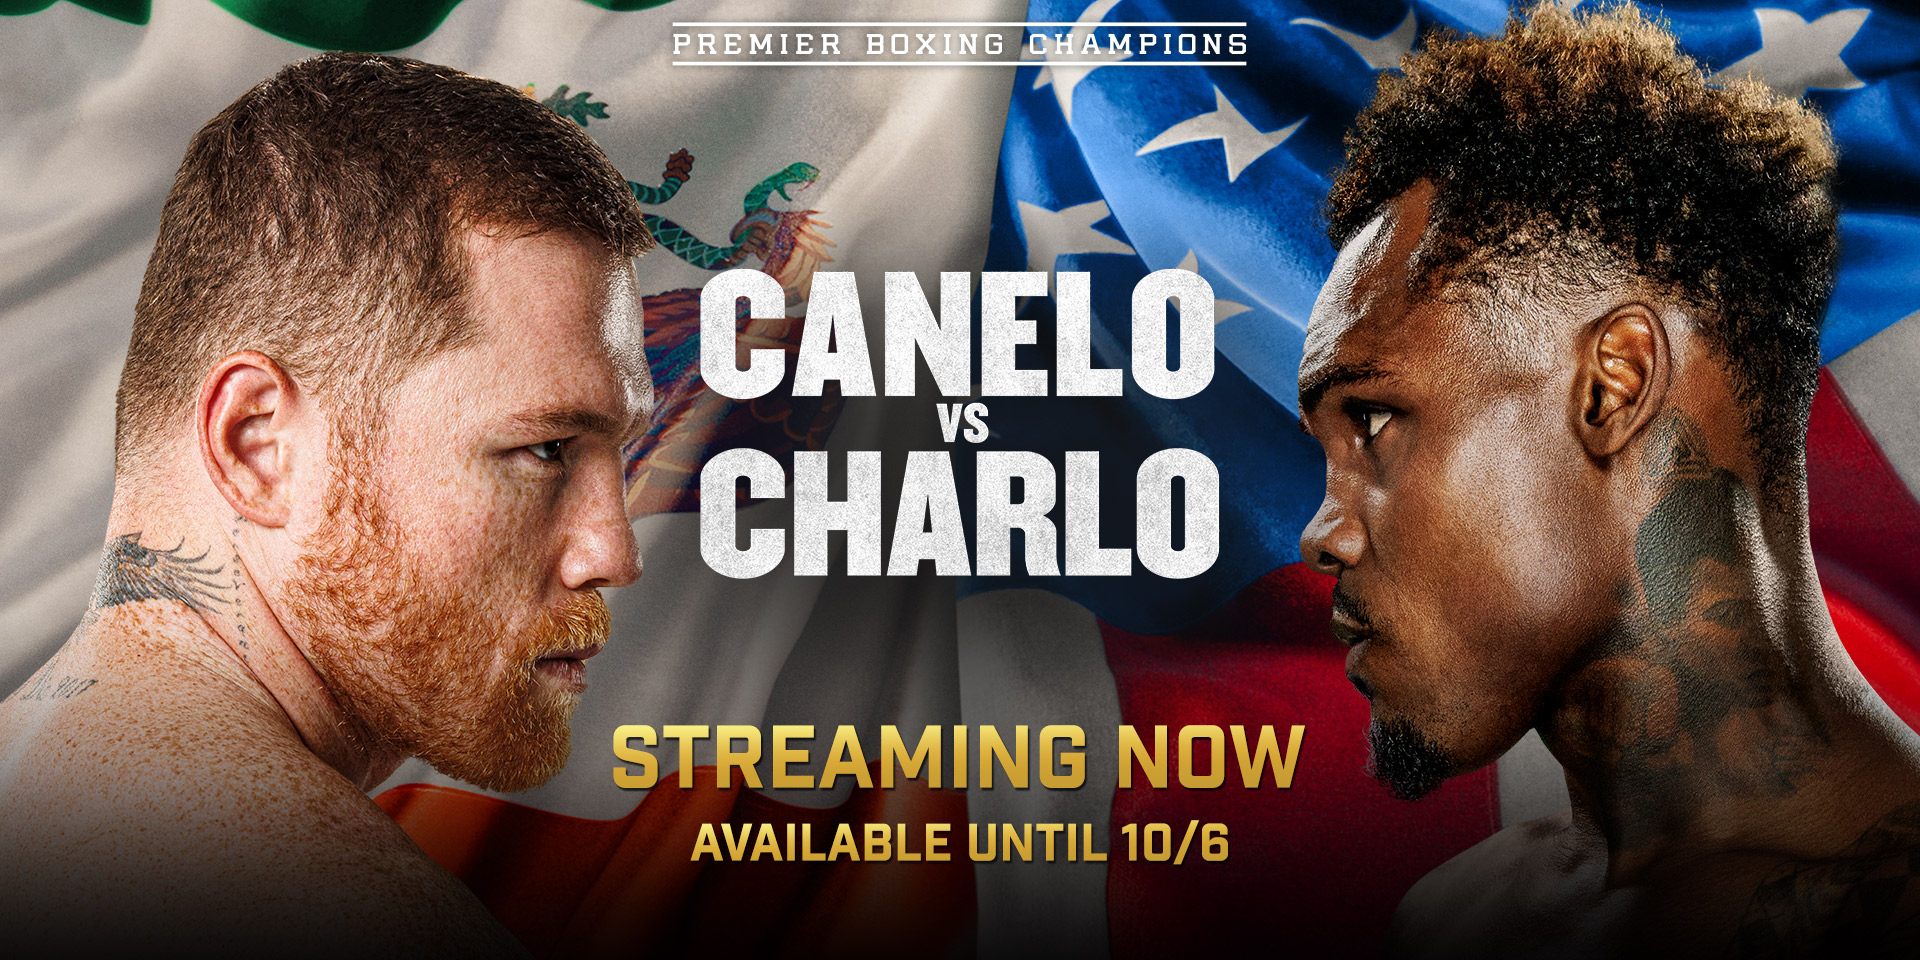 pay per view boxing streaming free